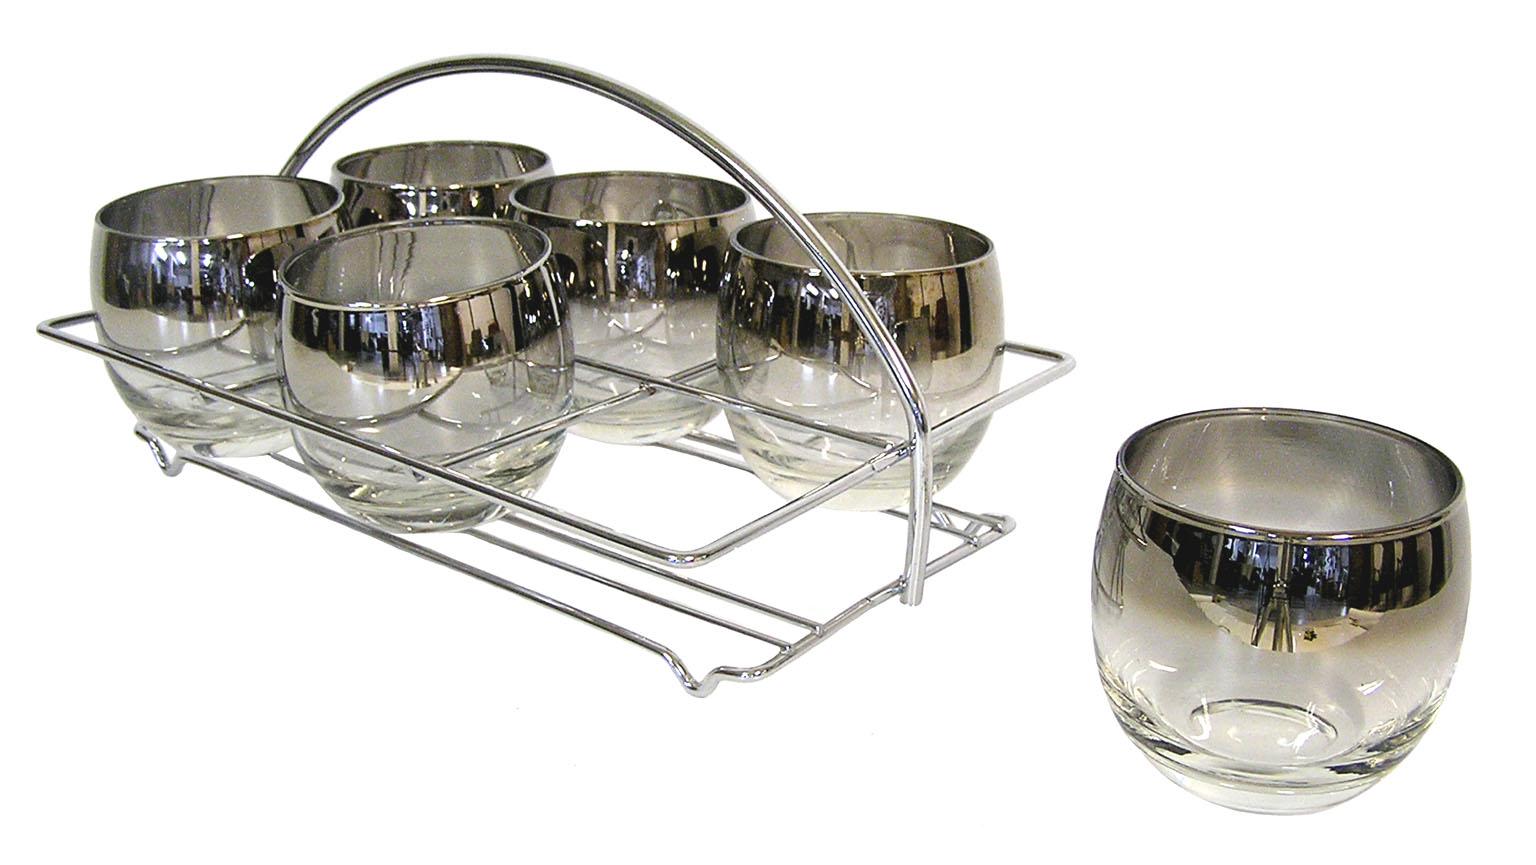 A set of six Dorothy Thorpe silver fade 10 ounce roly poly glasses from the 1960s Mid-Century Modern era. Set is decorated along the upper half in a faded silver tint and comes in it's original chromed steel carrier. Overall excellent condition.